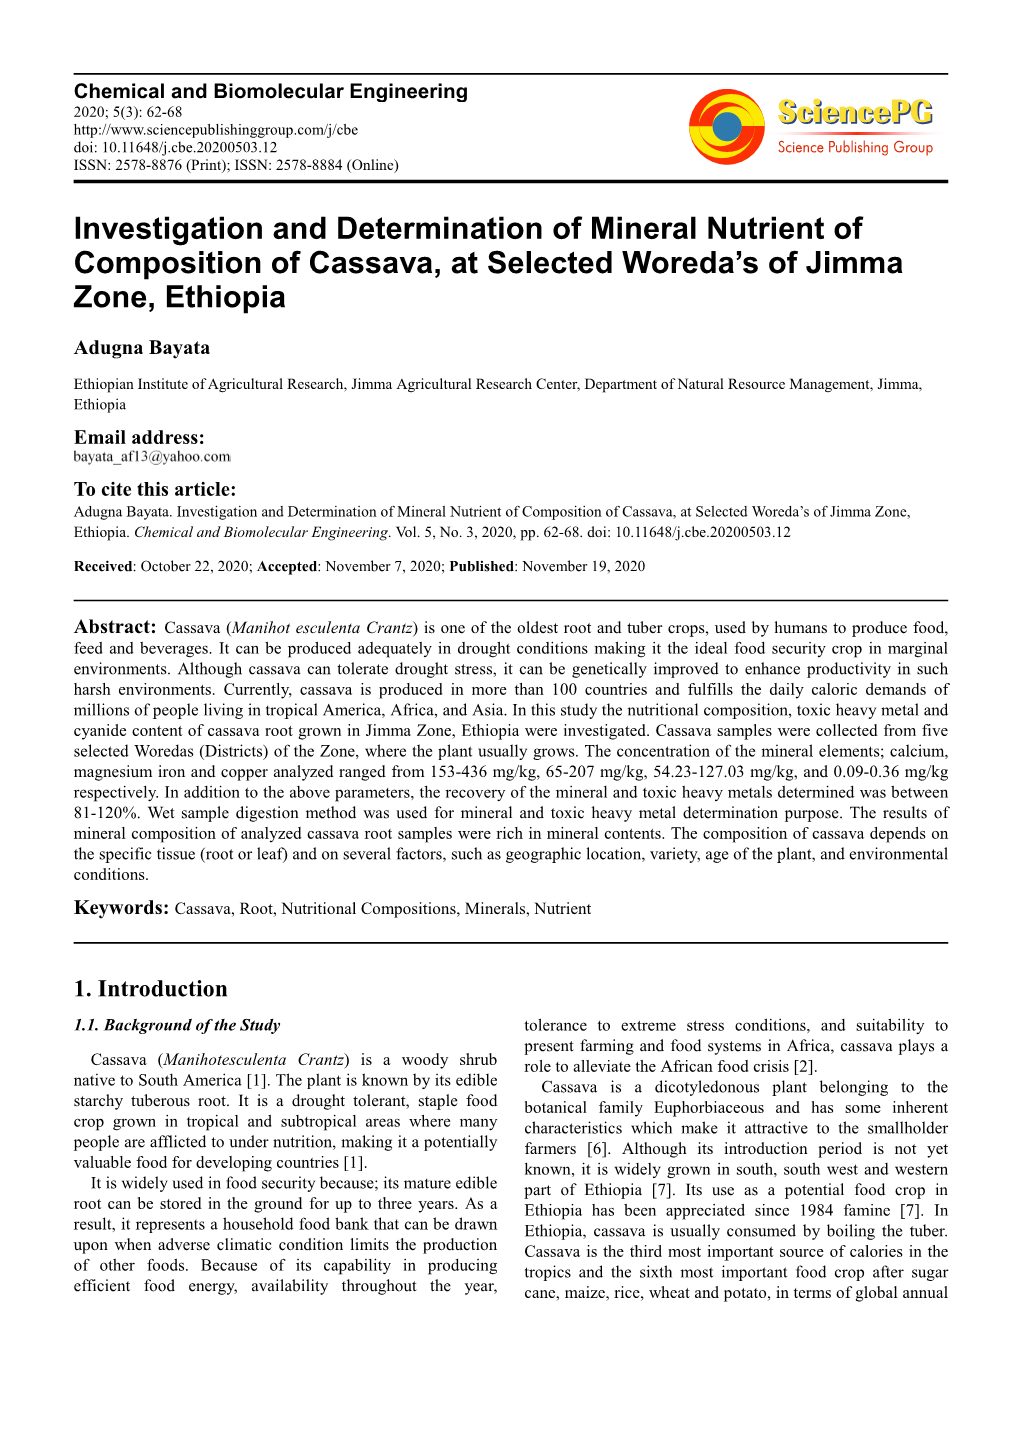 Investigation and Determination of Mineral Nutrient of Composition of Cassava, at Selected Woreda’S of Jimma Zone, Ethiopia